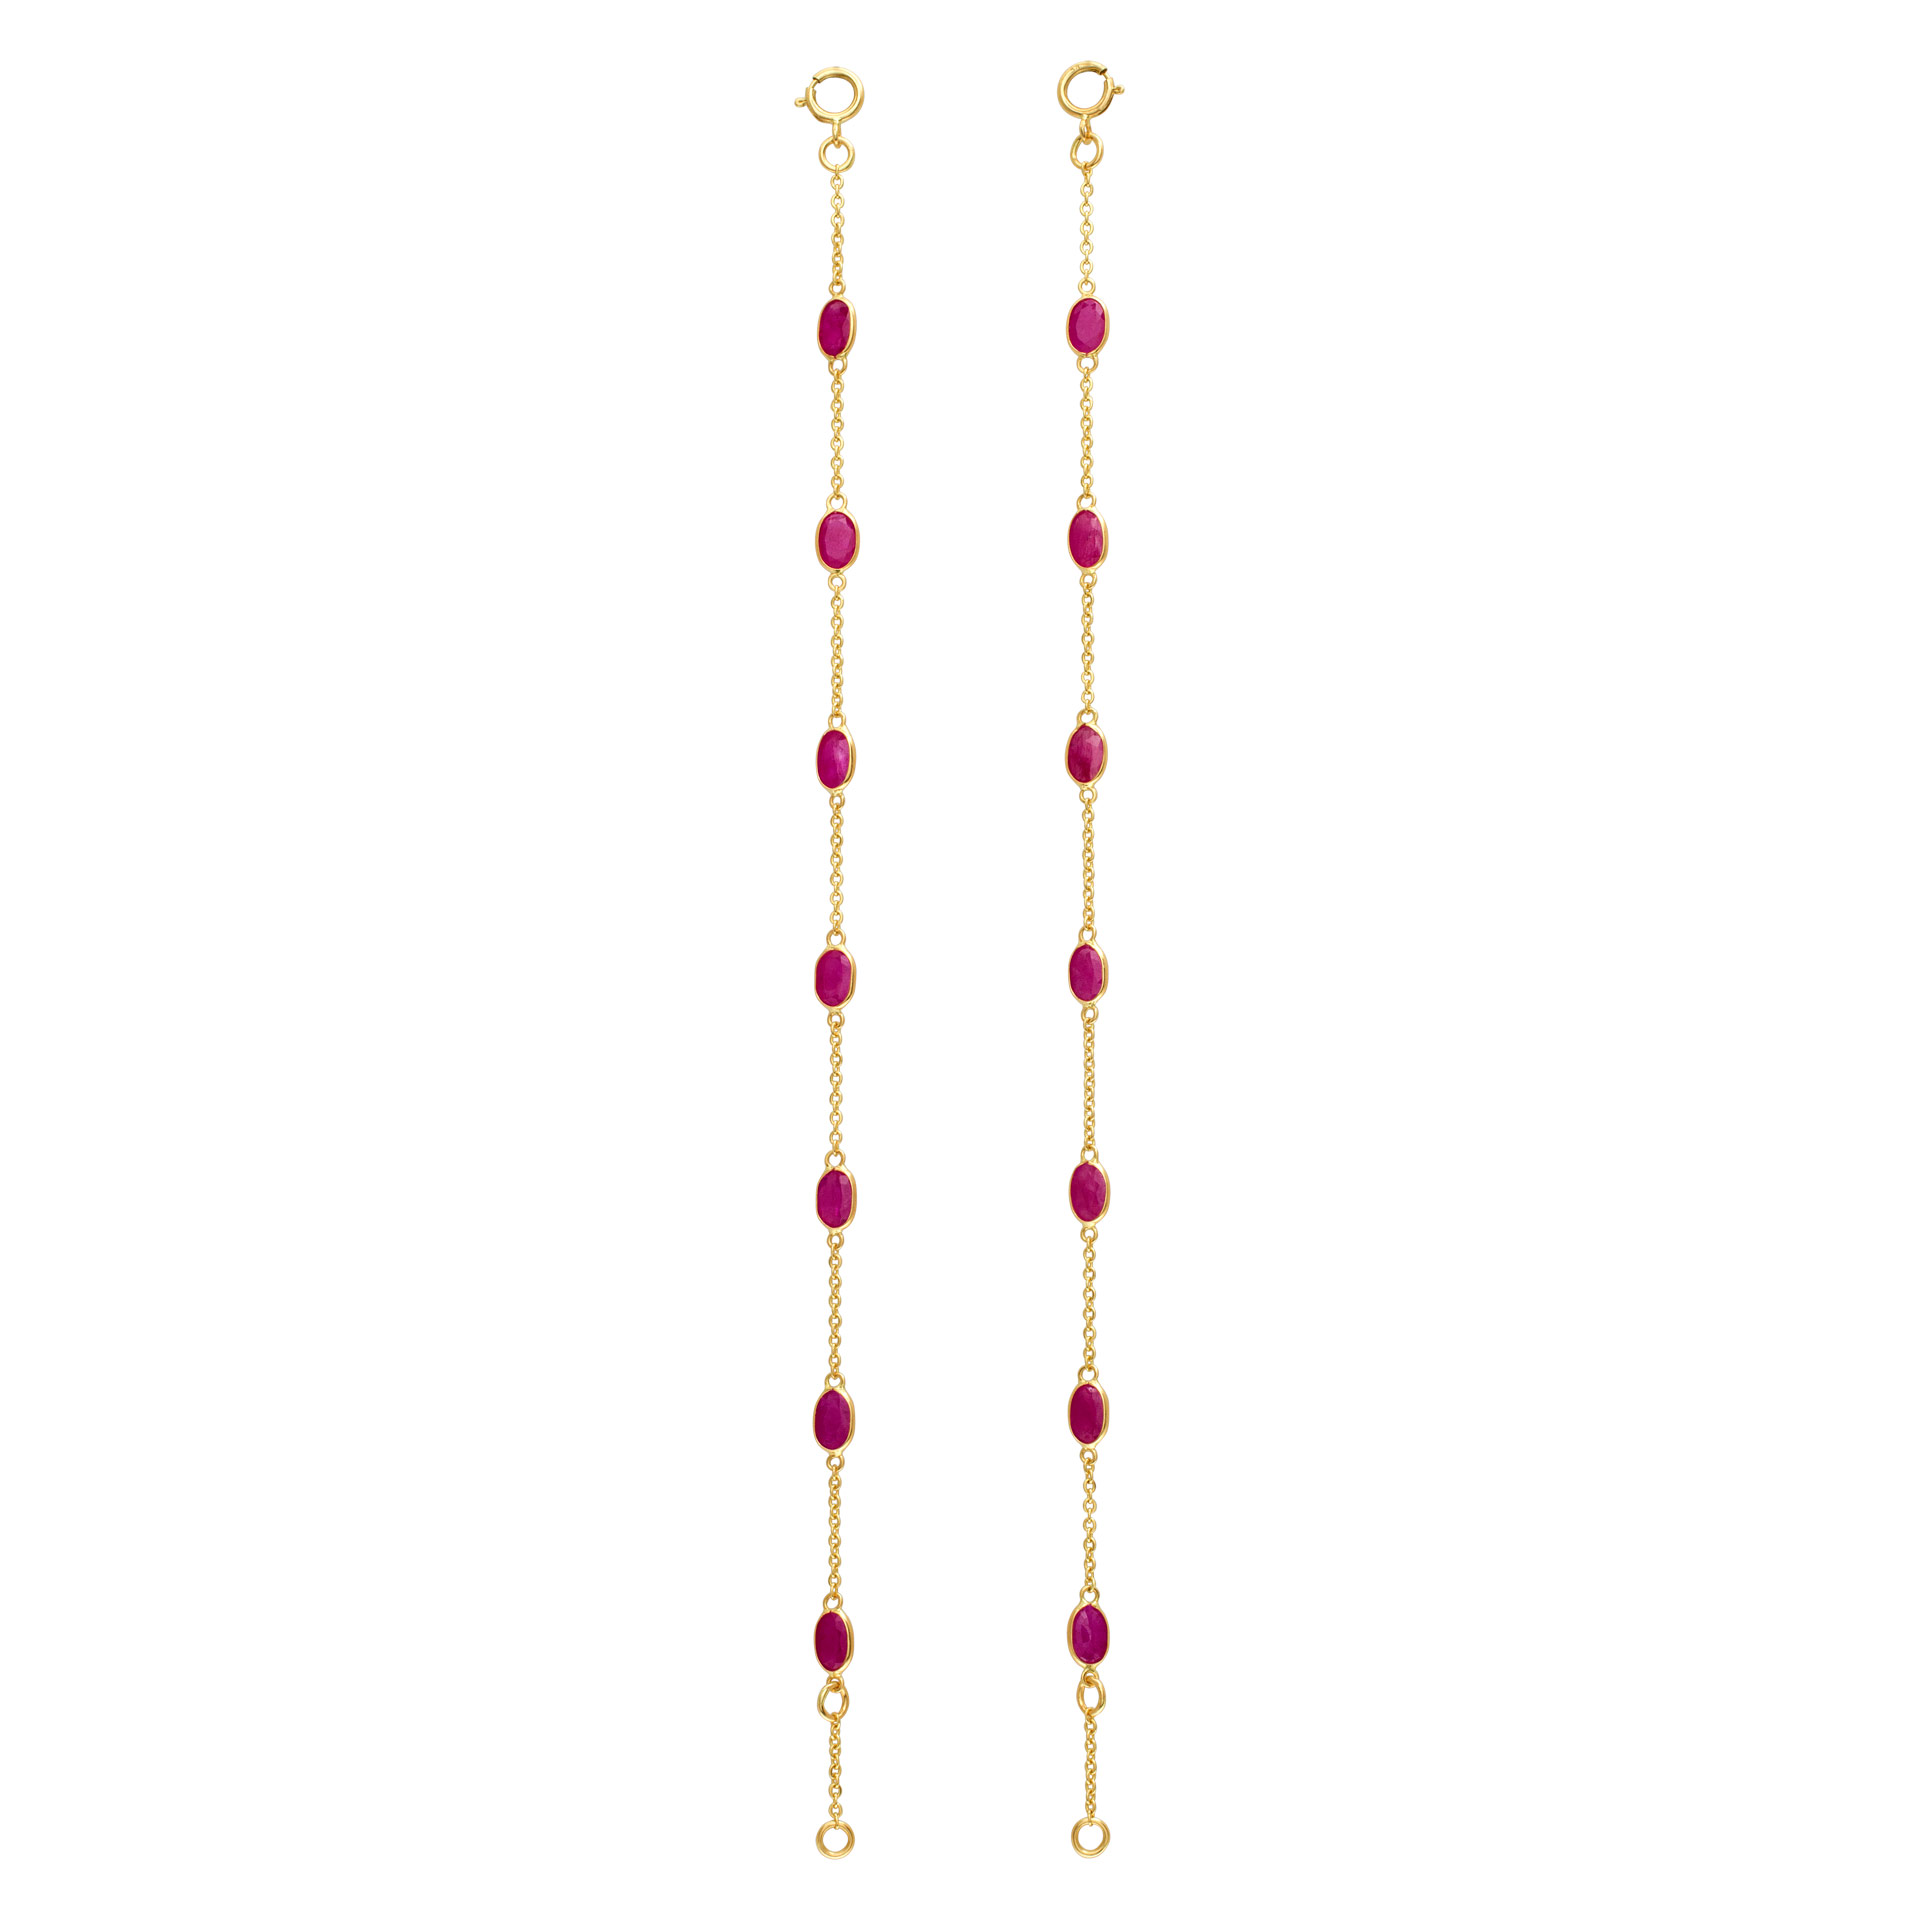 Two Ruby bracelet strands with approximately 7.22 carats in rubies in 14k gold image 1